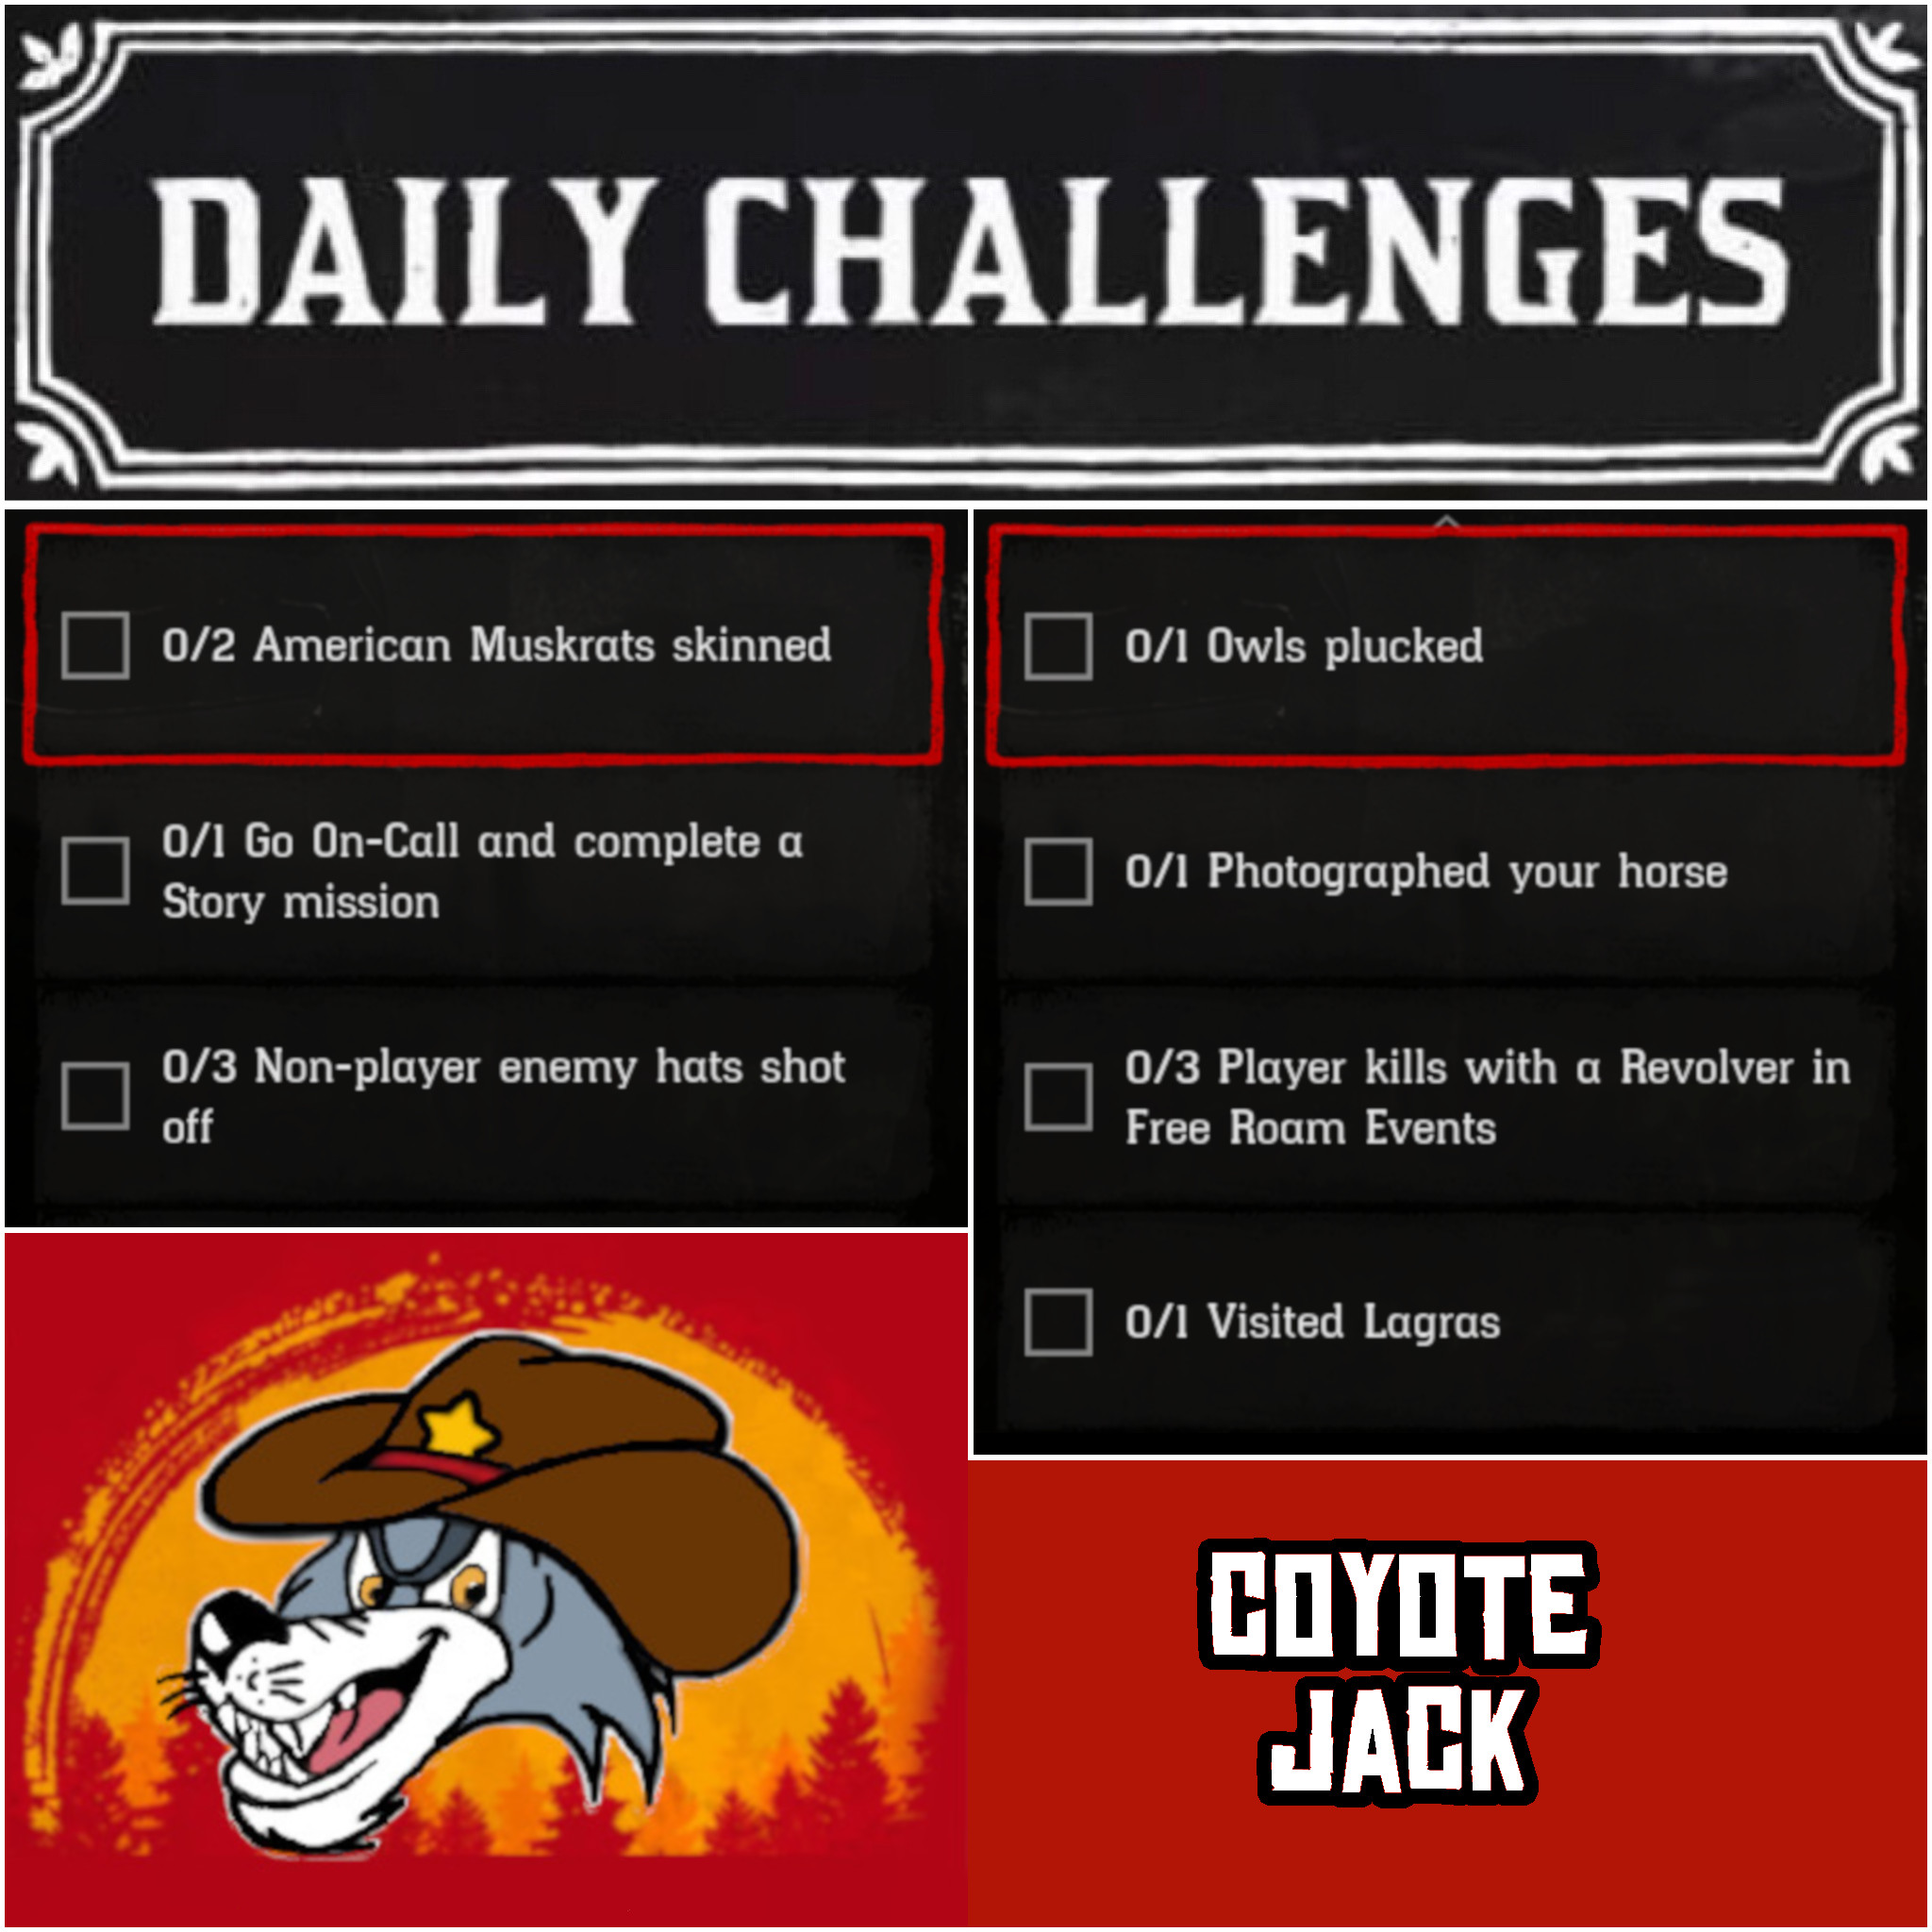 You are currently viewing Saturday 13 March Daily Challenges